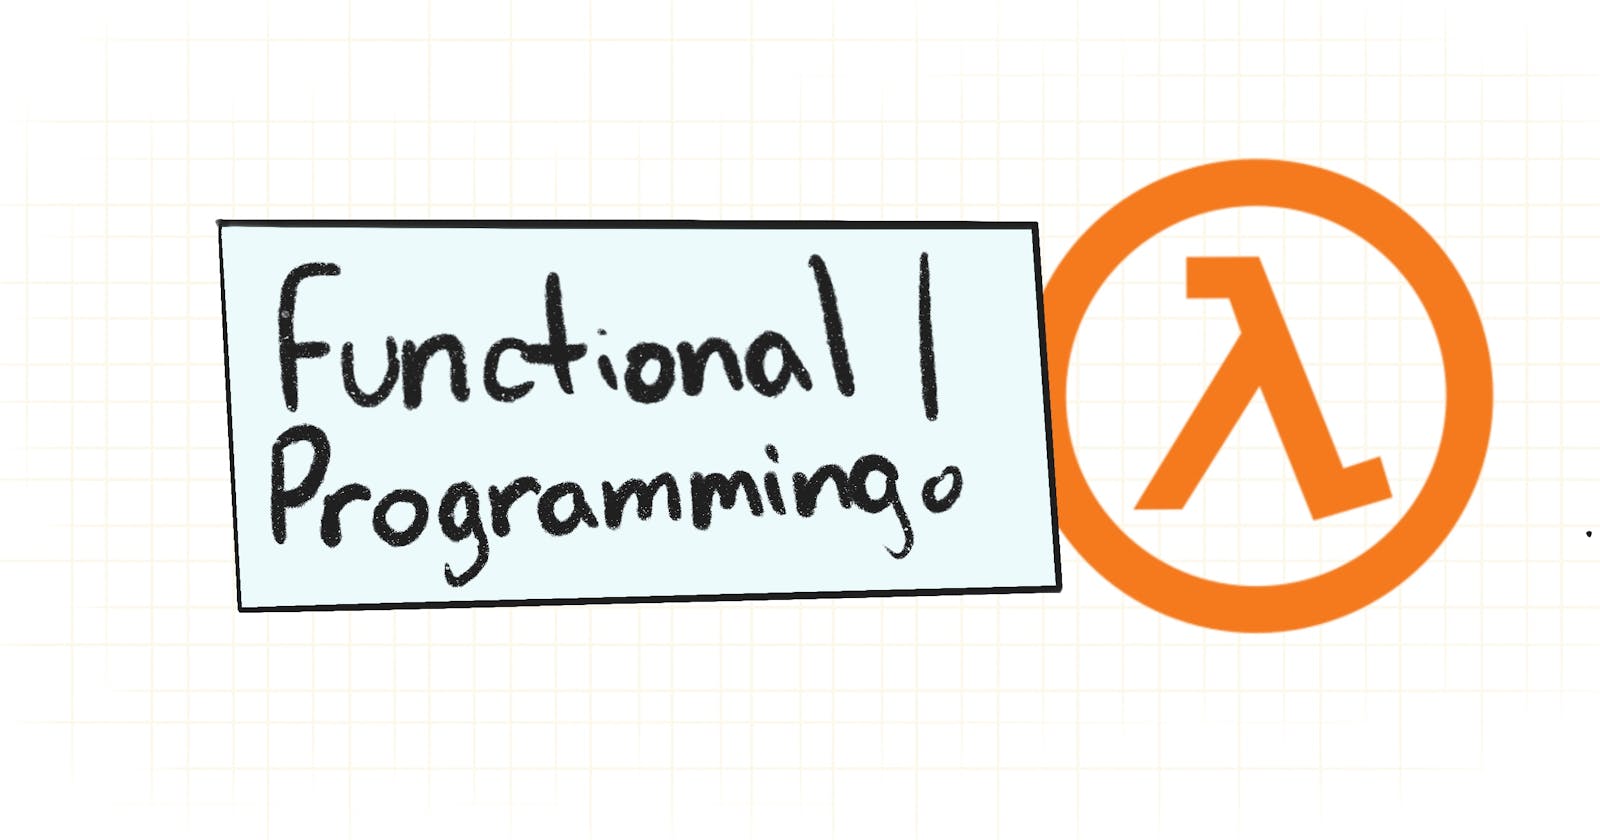 What you need to know about functional programming